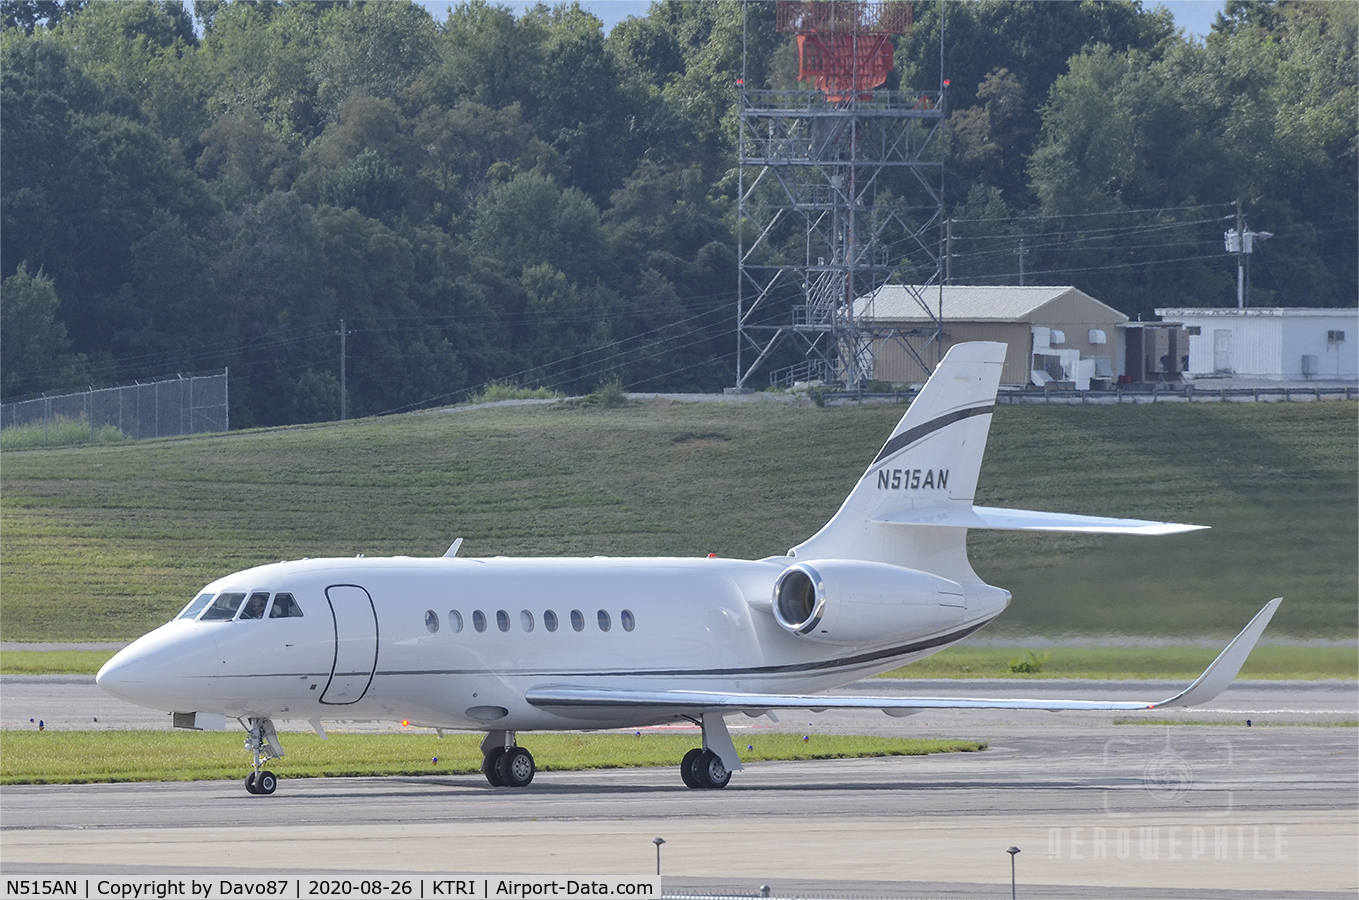 N515AN, 2015 Dassault Falcon 2000EX C/N 284, Just arrived at Tri-Cities Airport and on taxiway to park.